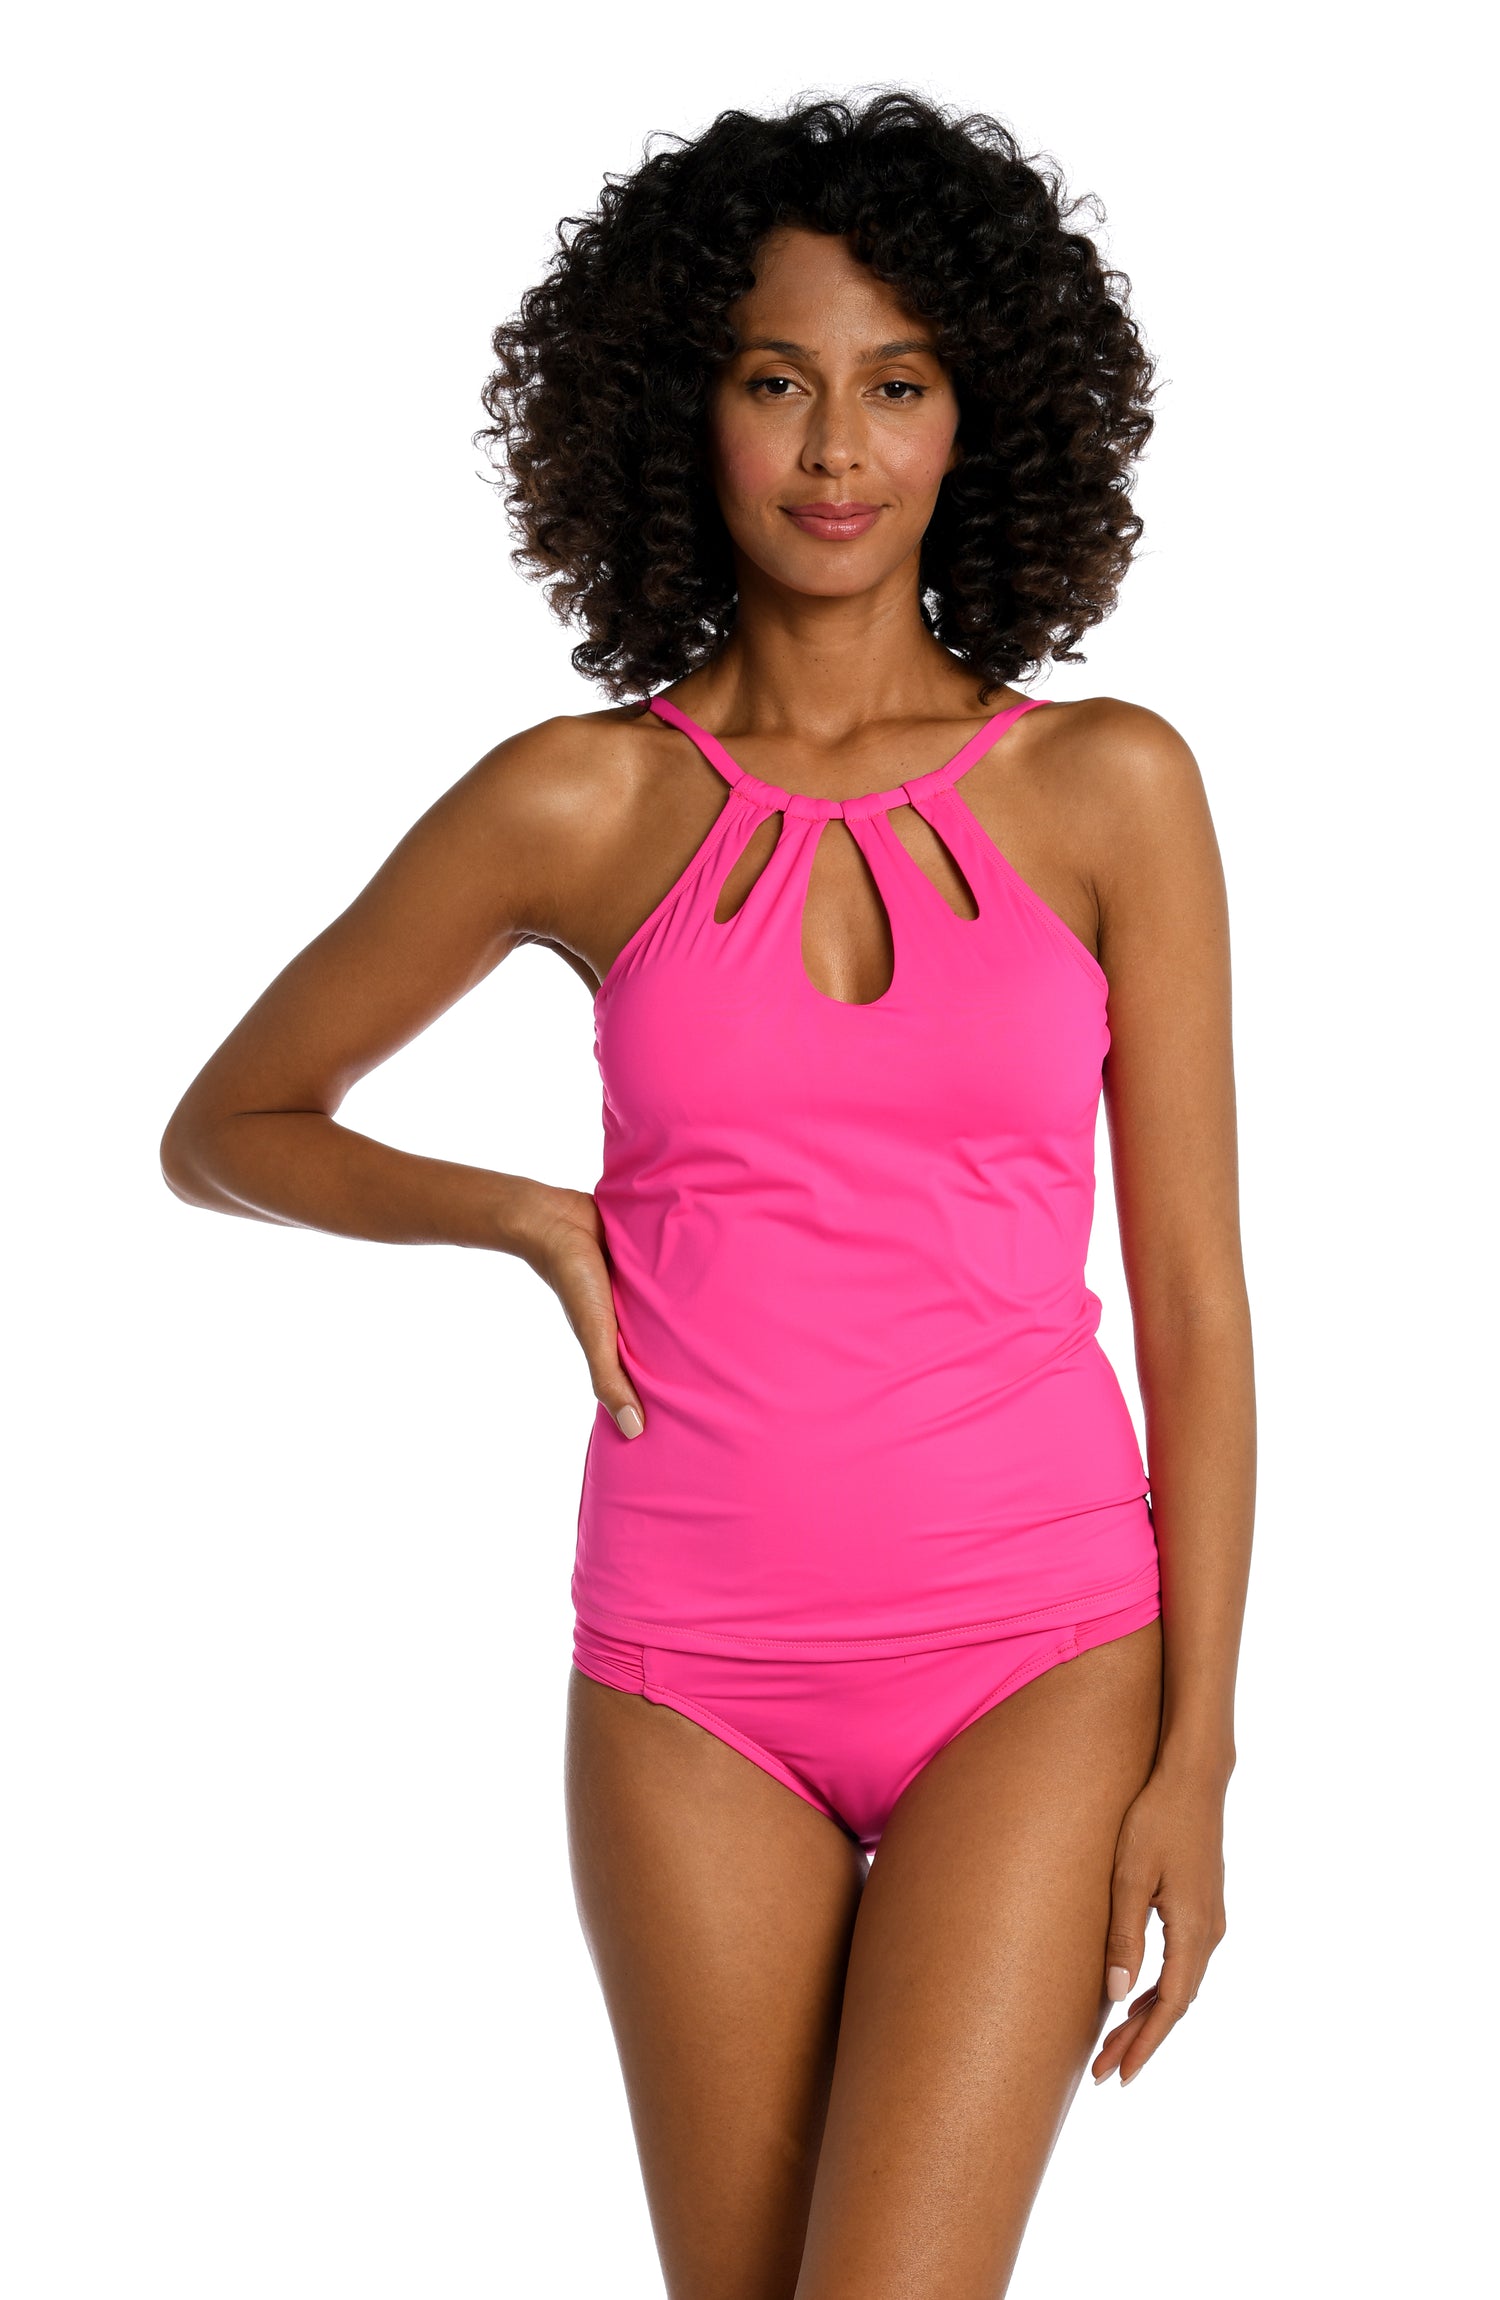 Model is wearing a pop pink colored keyhole tankini swimsuit top from our Best-Selling Island Goddess collection.